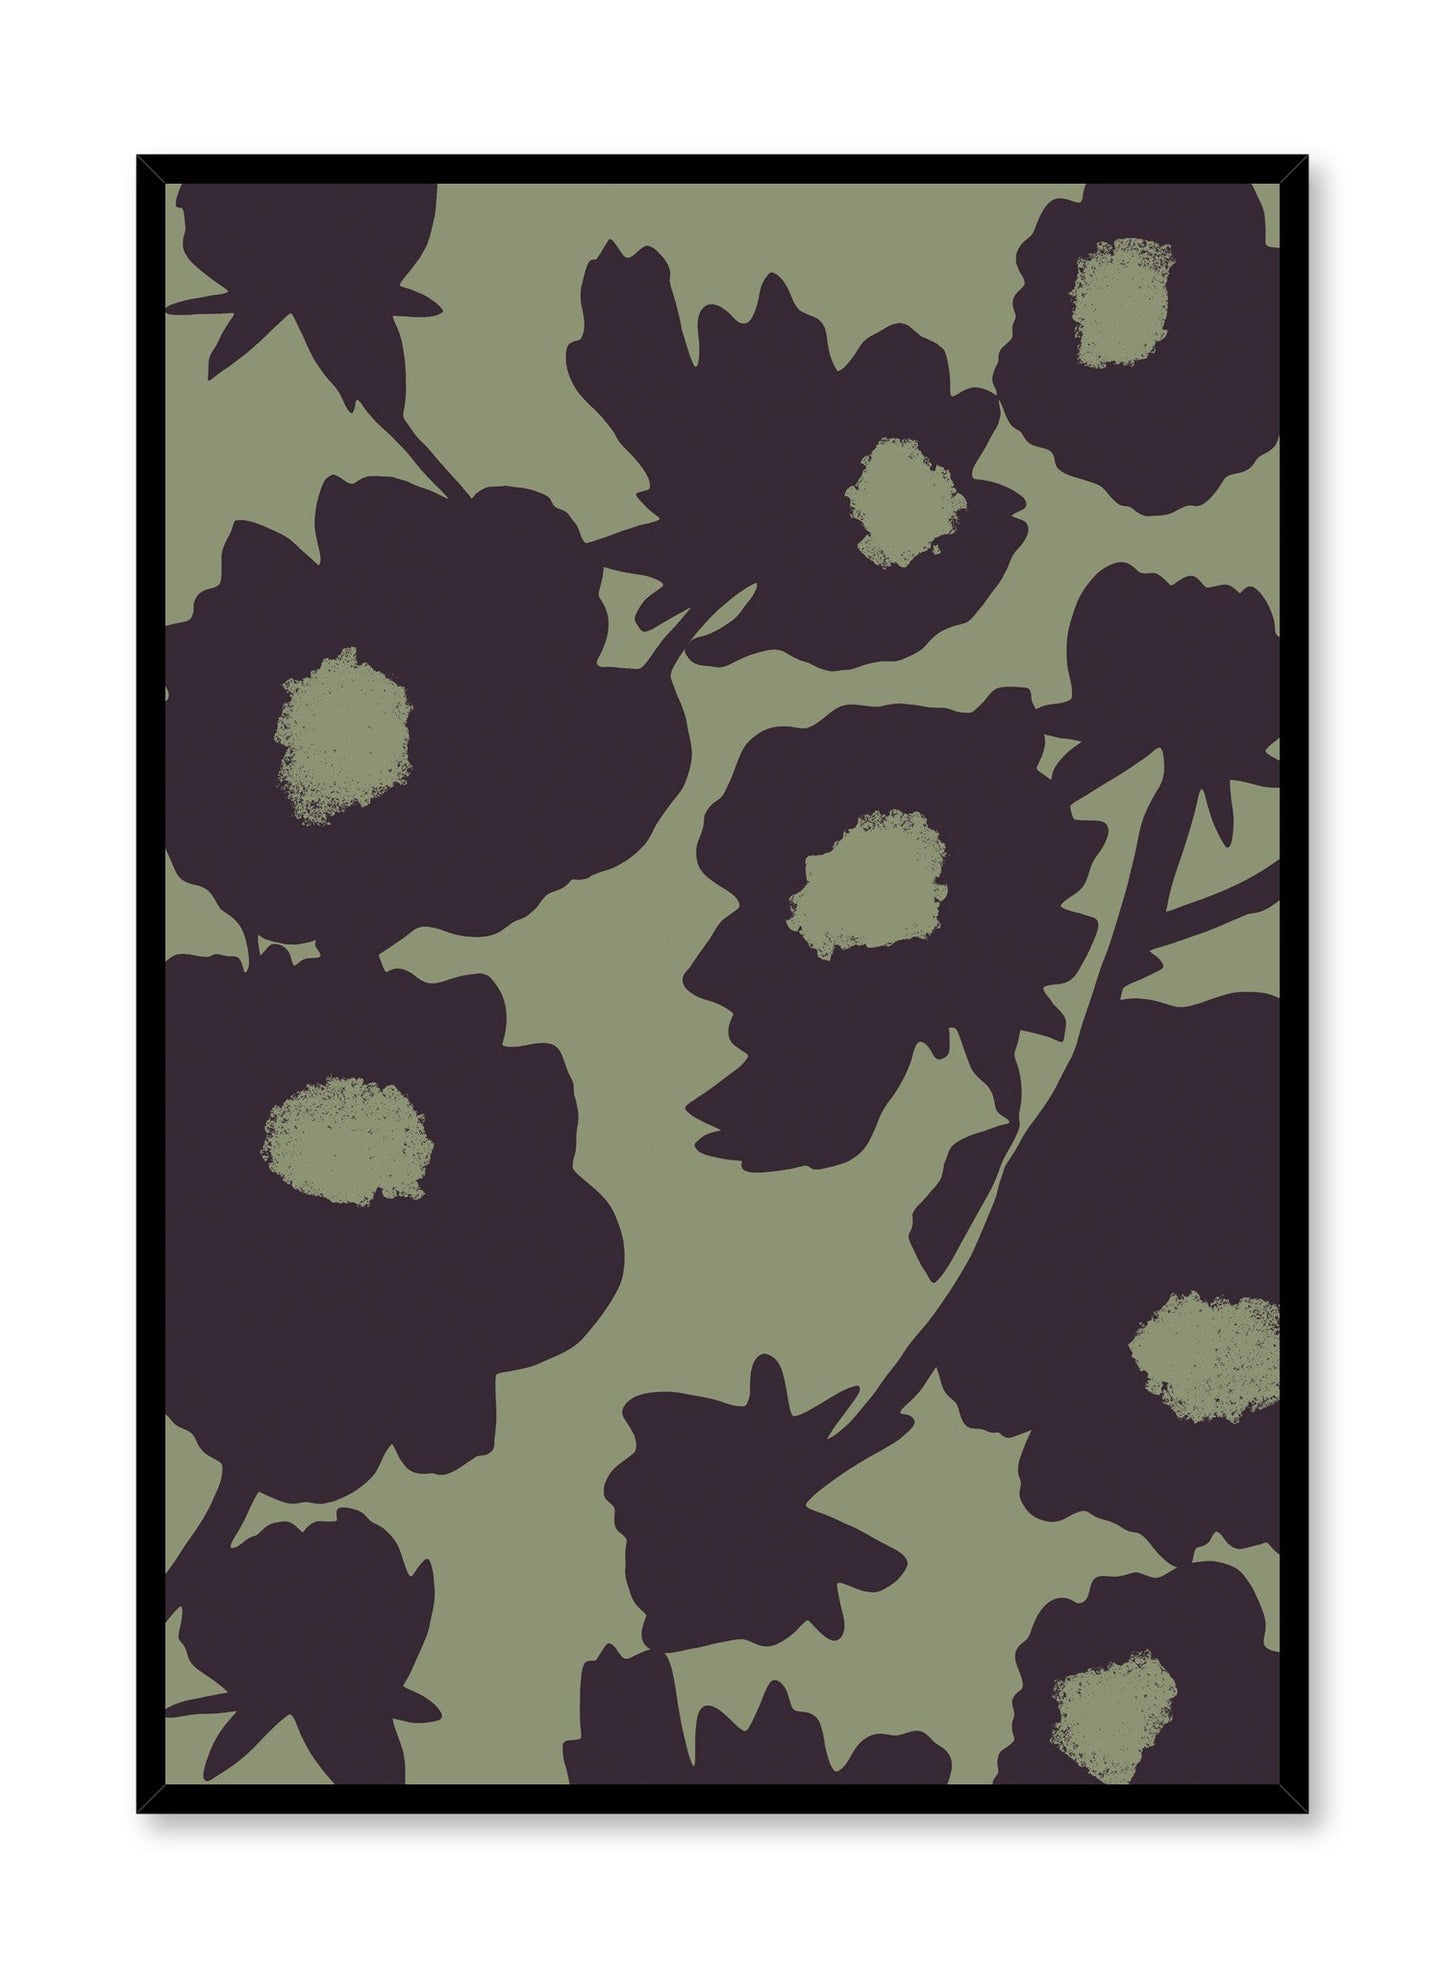 "Flower Bush in Green" is a minimalist illustration poster by Opposite Wall in black and beige of abstract flower bush inspired by French painter Henri Matisse.